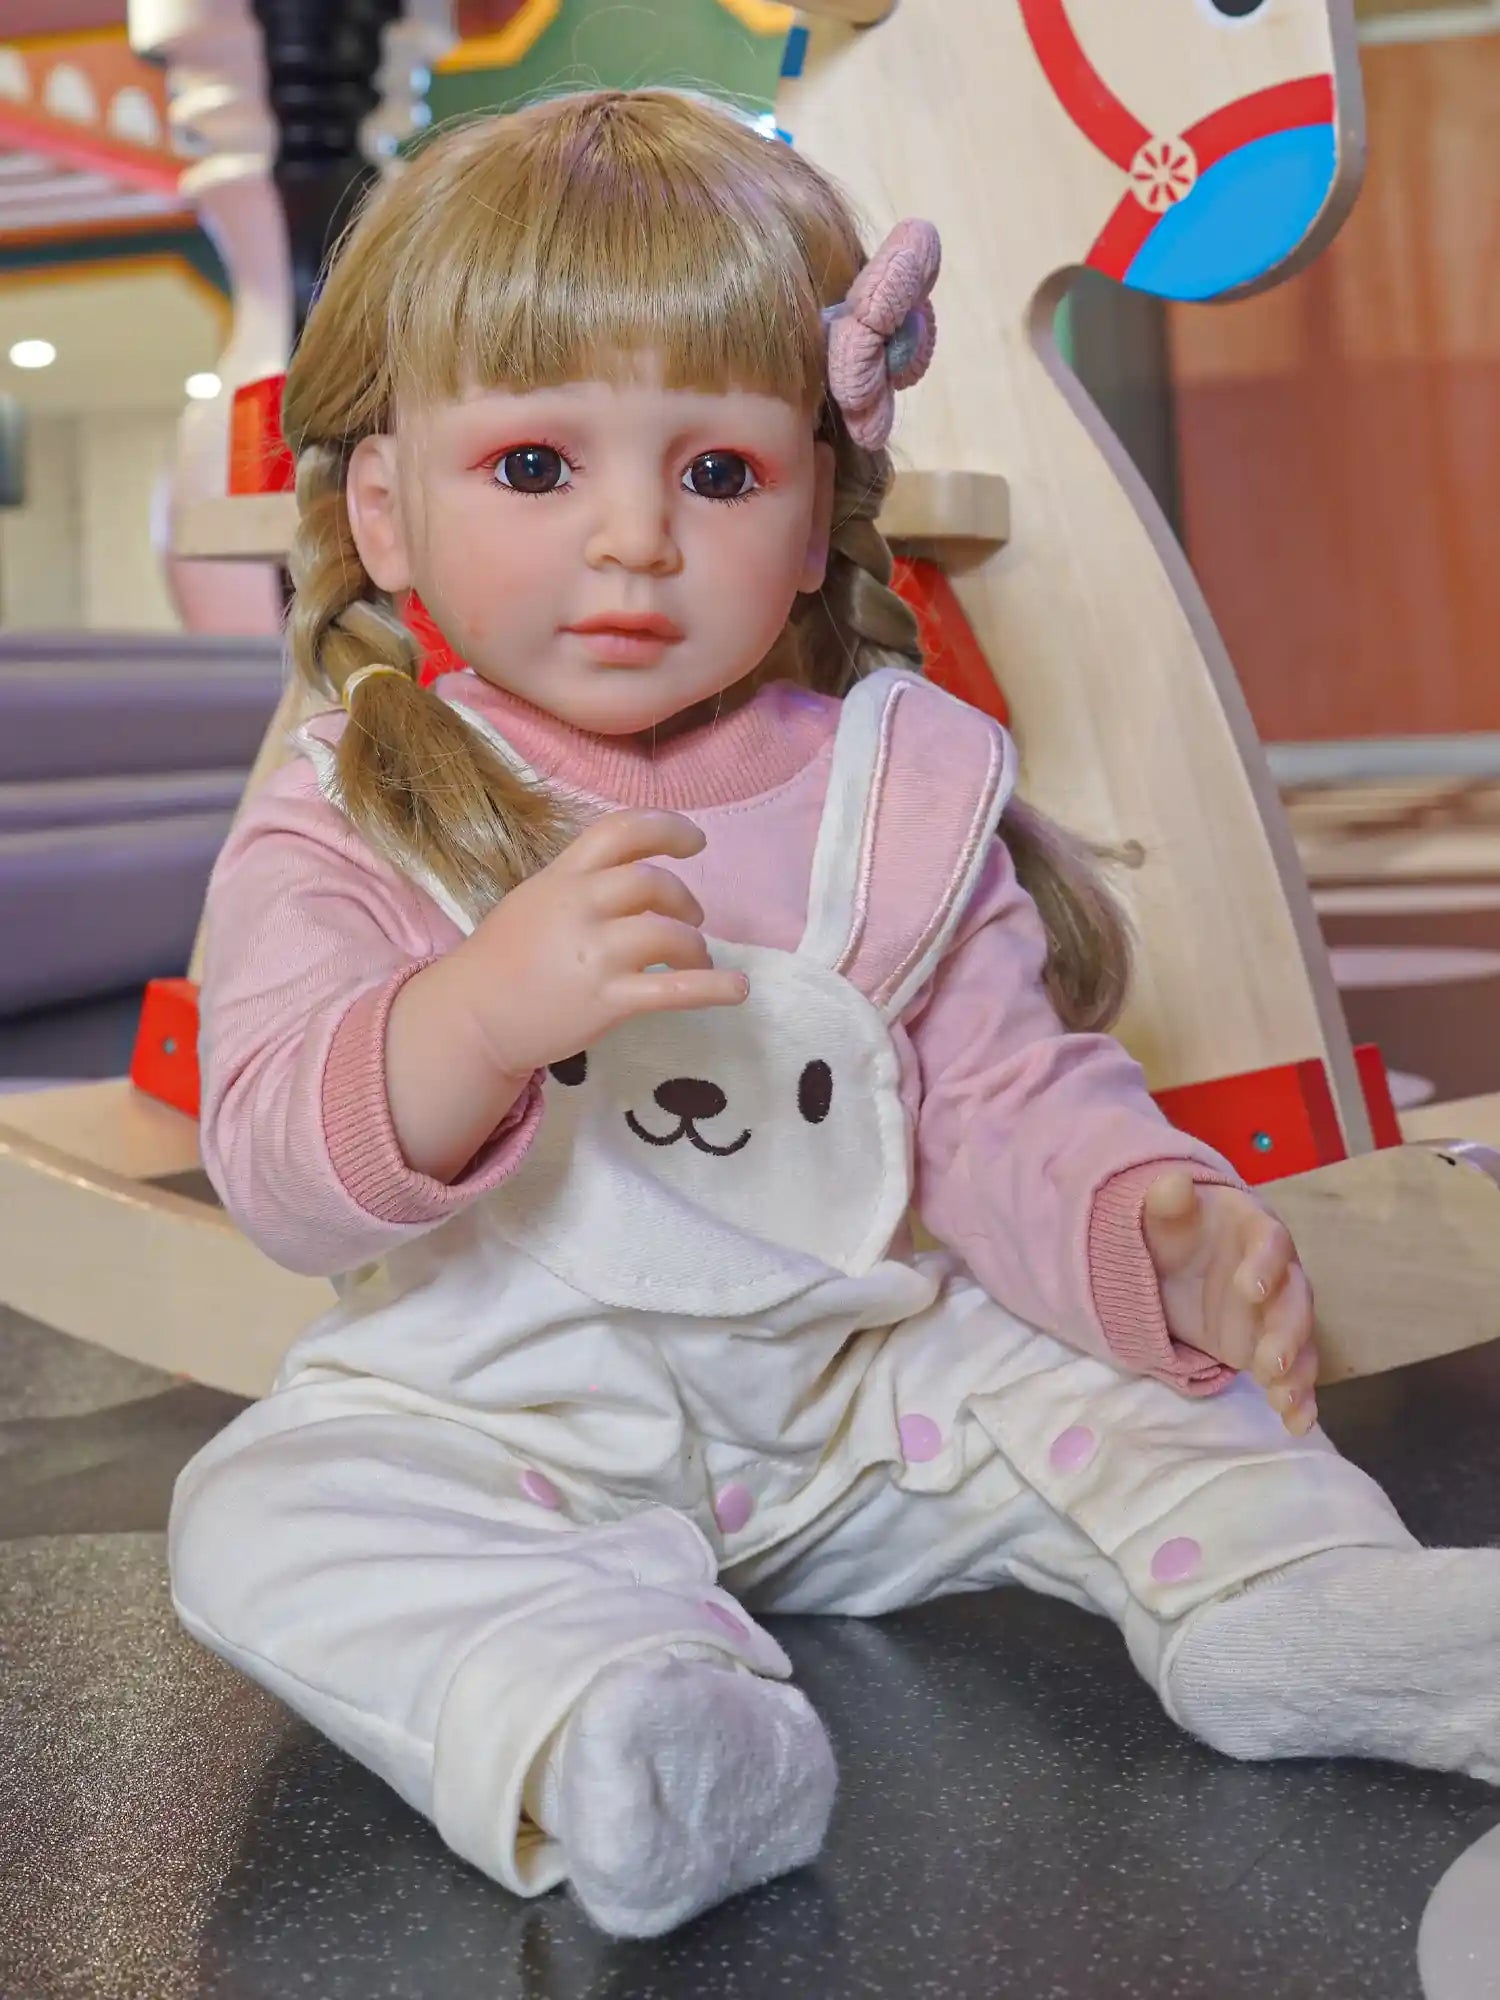 Toddler doll seated on the floor, wearing a pink sweater and white overalls with a bear design, with blonde braided hair and purple hair ties.